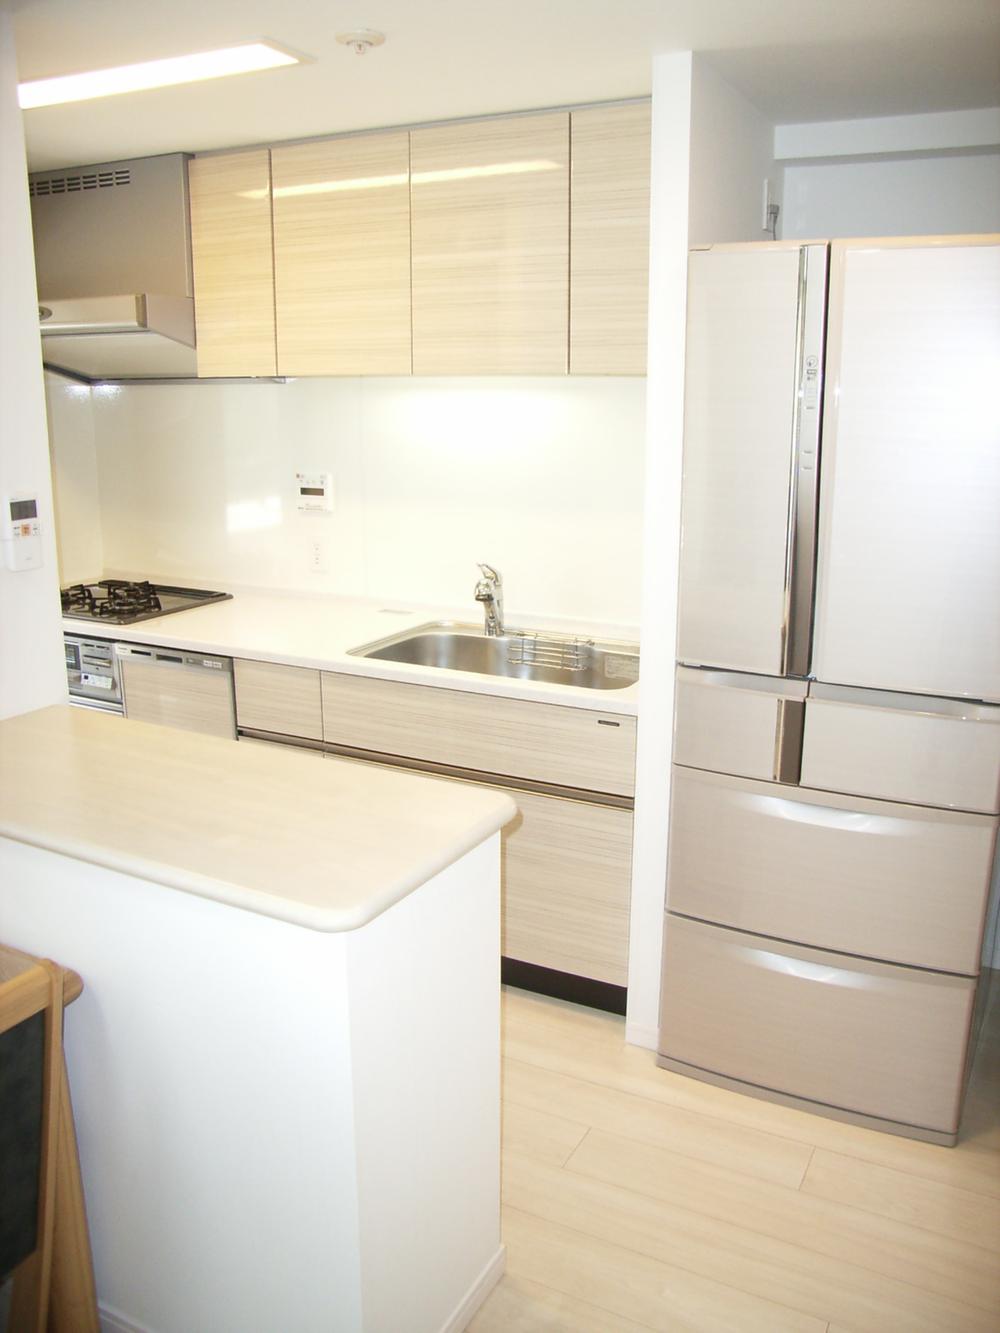 Same specifications photo (kitchen). Open kitchen appearance